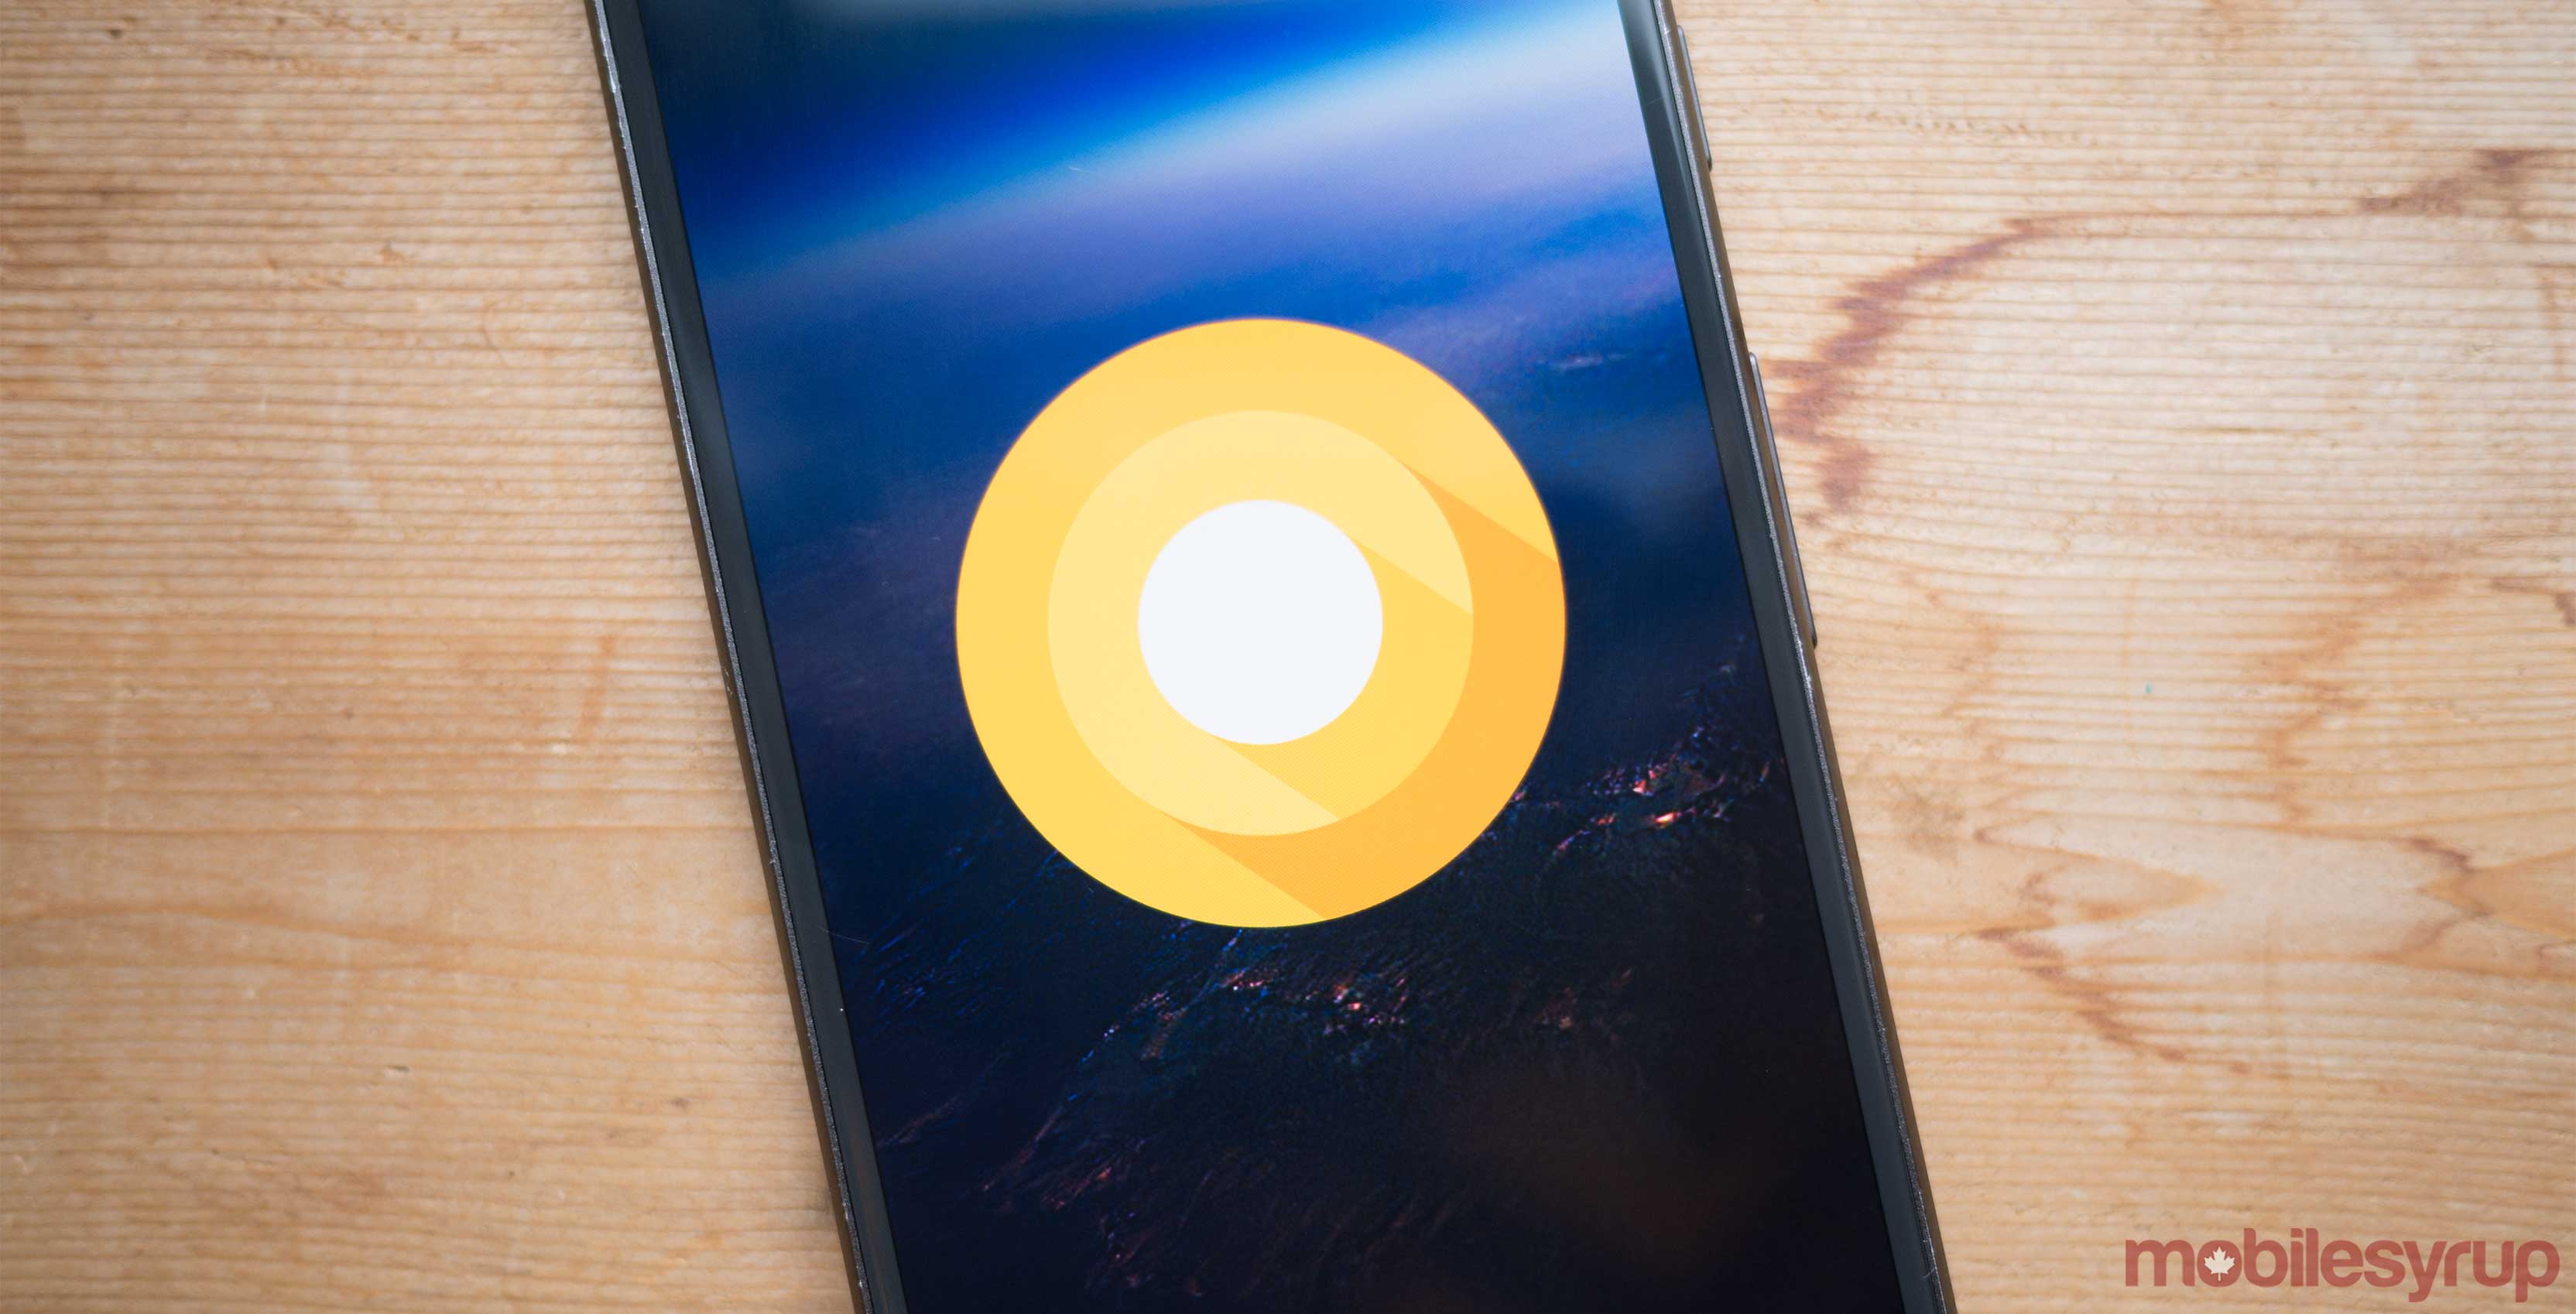 Android O on a Pixel device